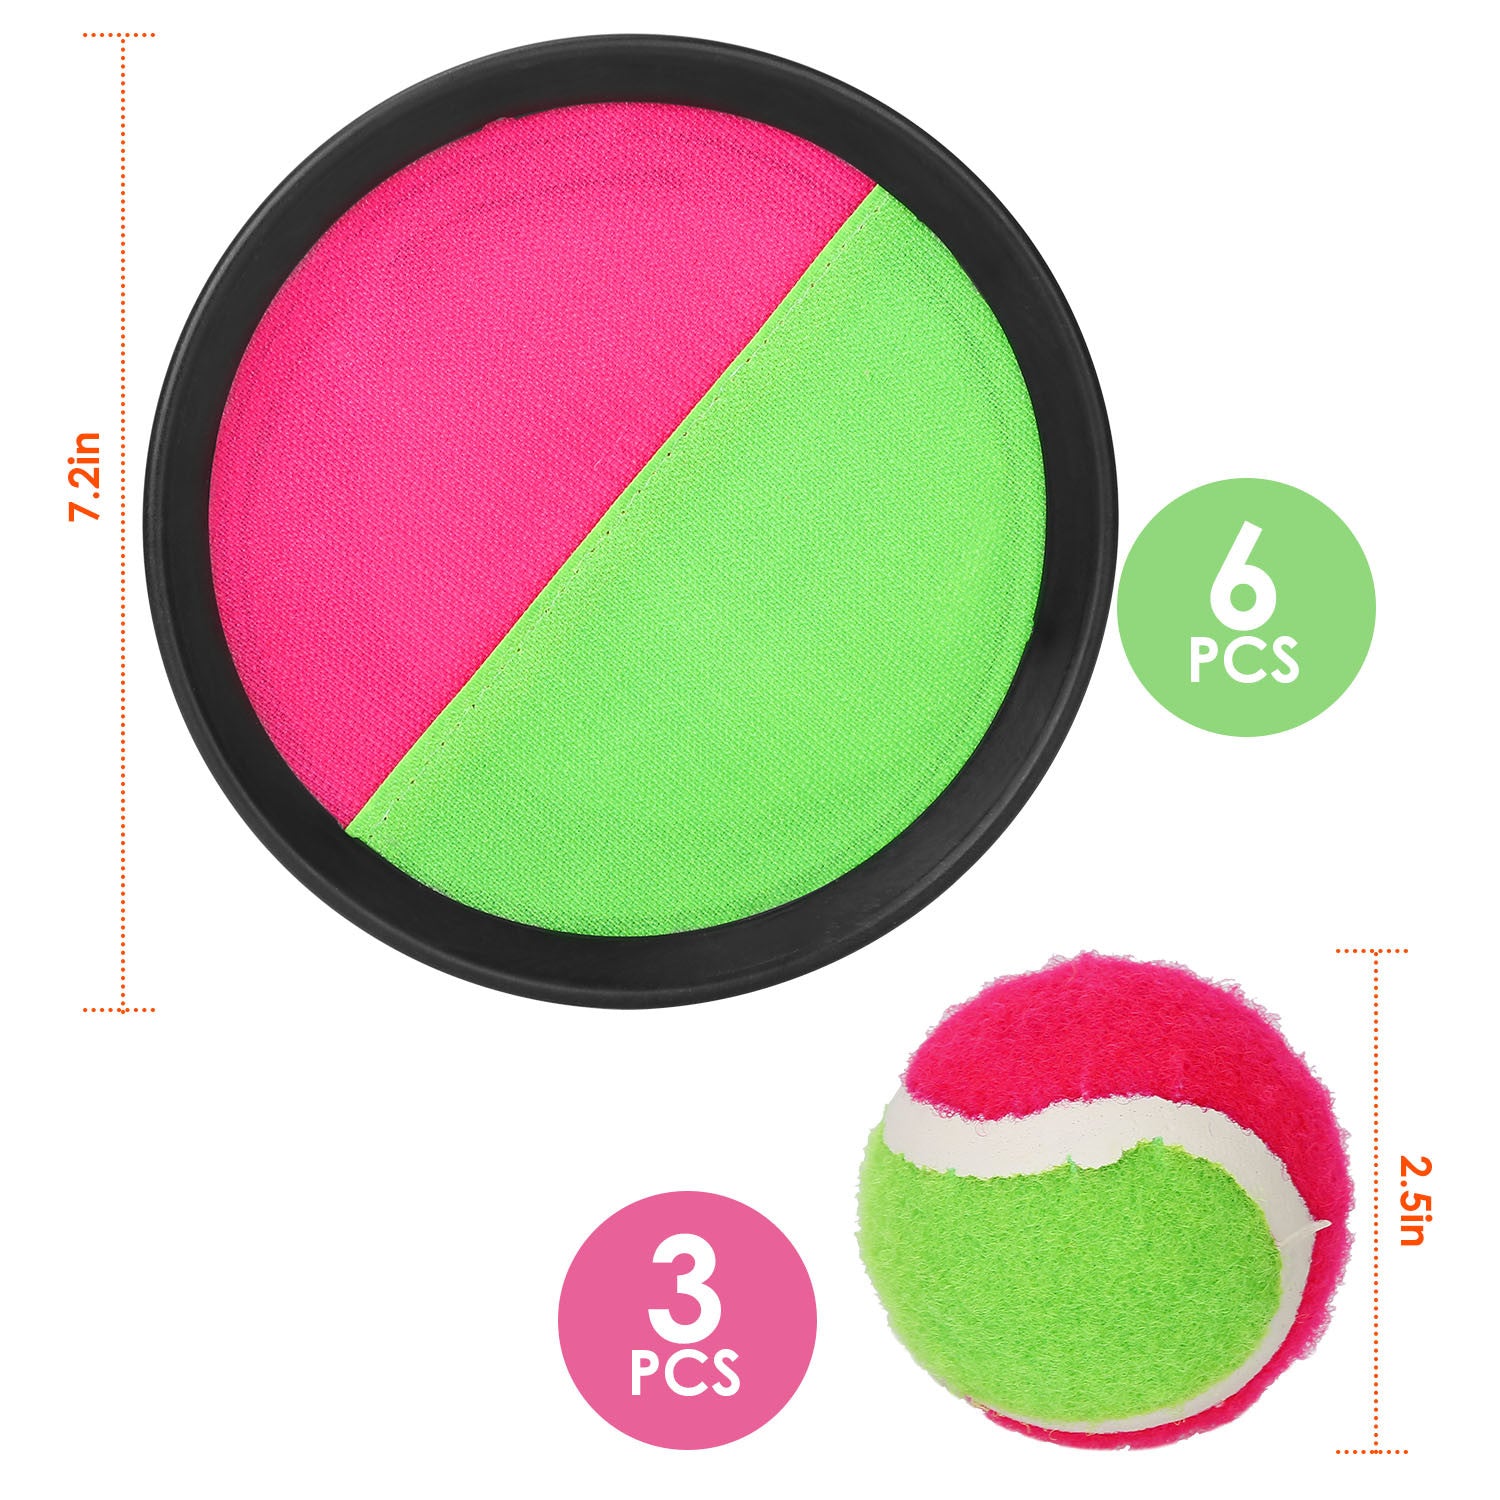 A set of 3Sets Toss and Catch Ball Throw Catch Ball Paddle Outdoor Ball Game Catch Game Beach Games, perfect for a fun backyard game with adjustable paddles.